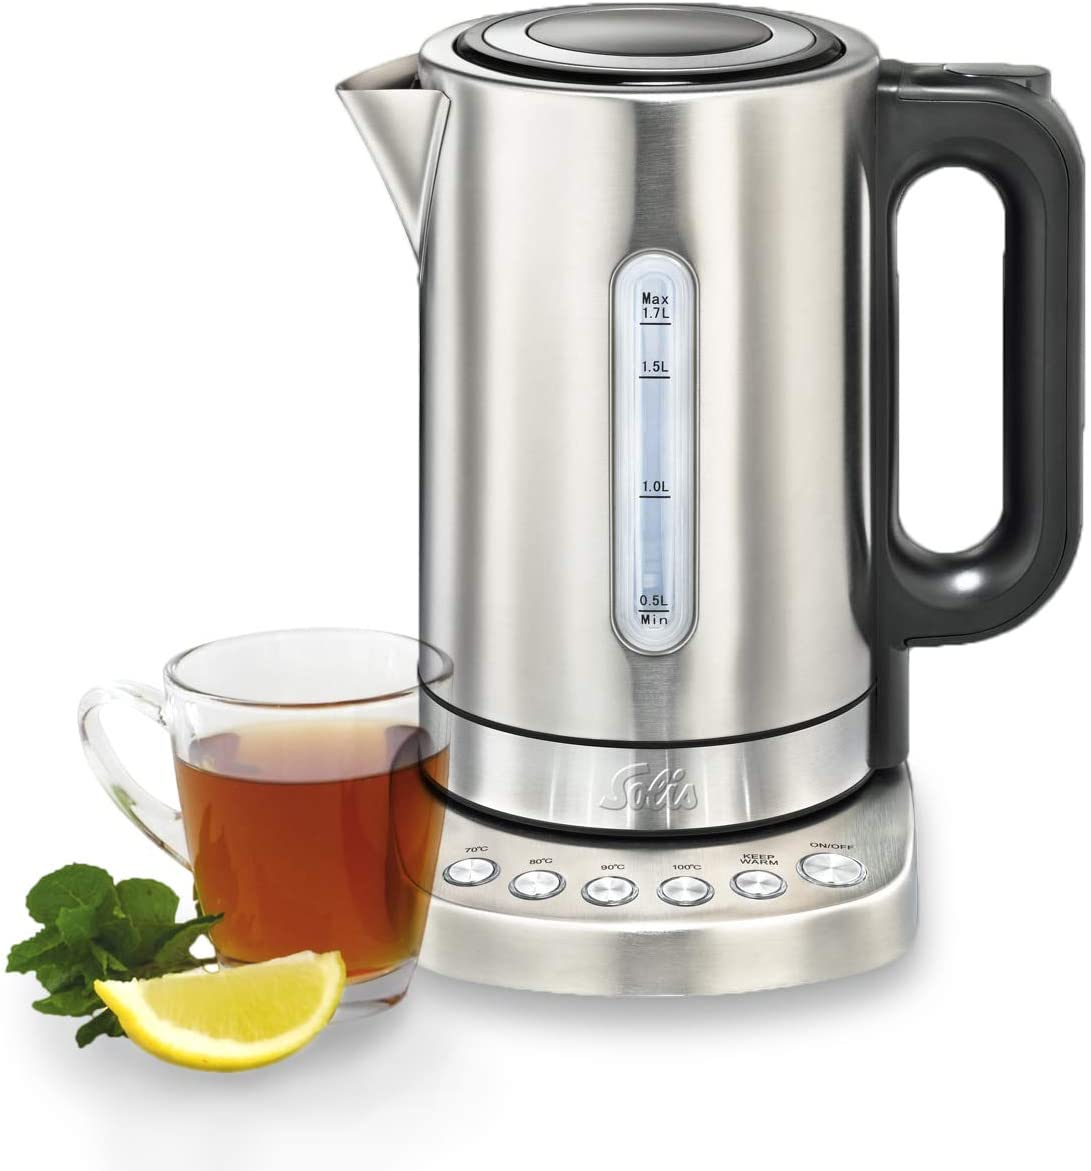 Solis Vario Temp Kettle 5516 - Kettle with Temperature Setting - Keep Warm Function - Removable Limescale Filter - 1.7 L